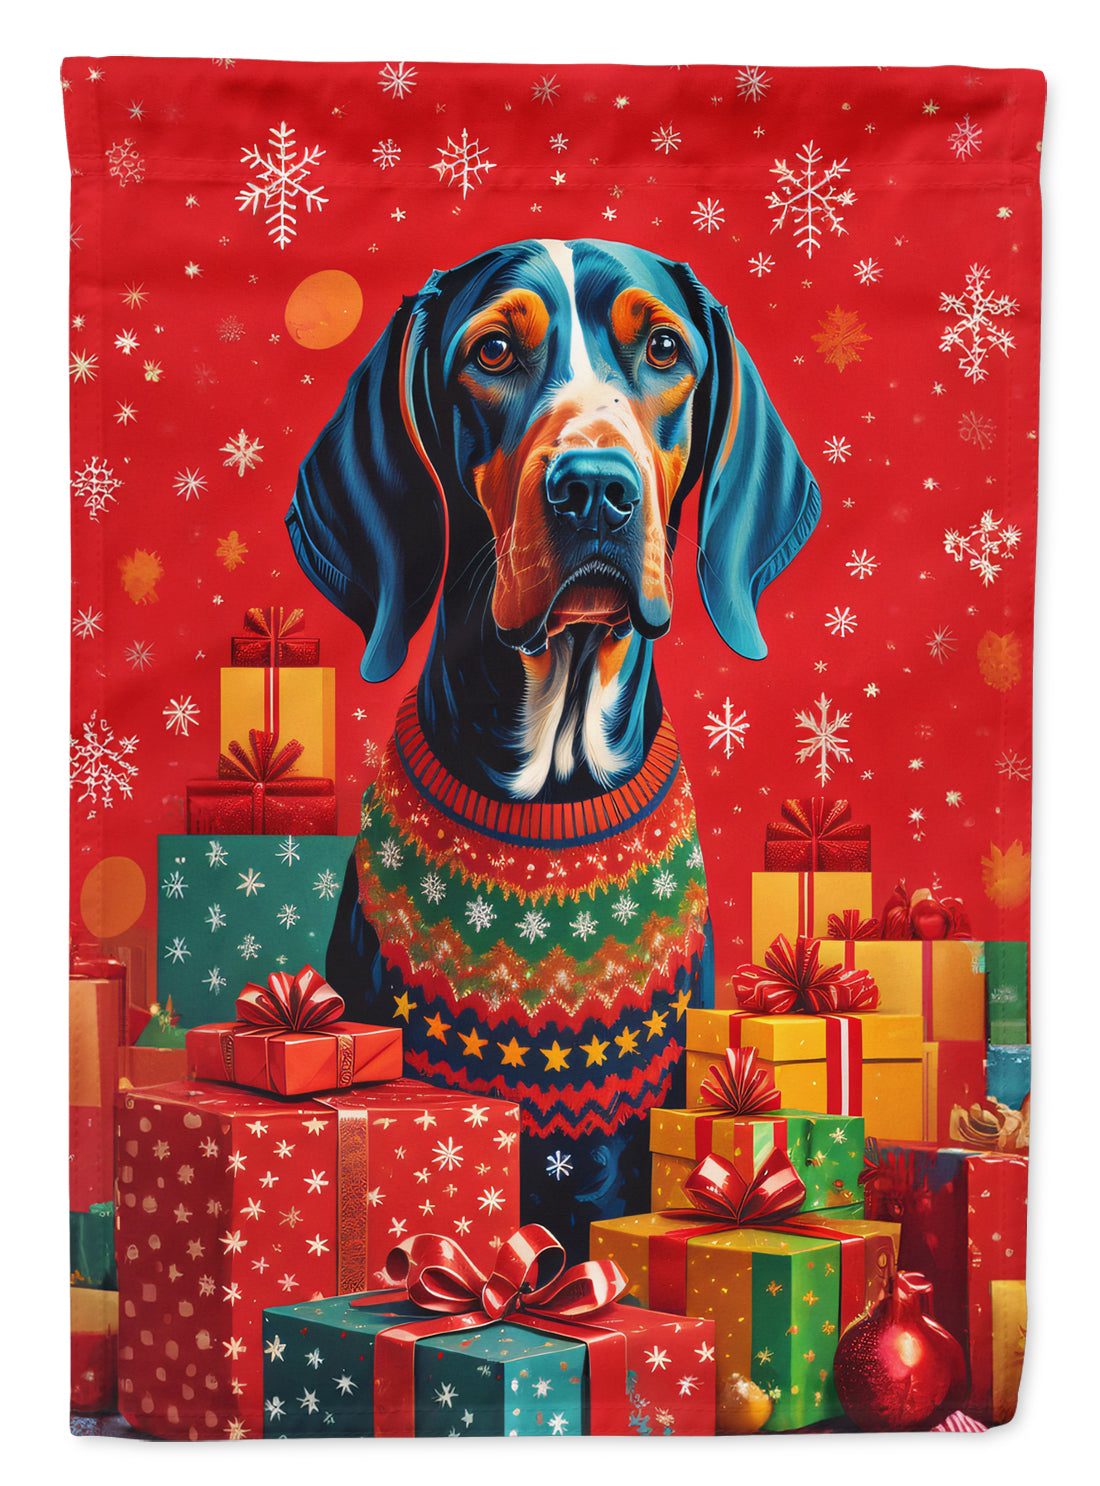 Buy this American English Coonhound Holiday Christmas Garden Flag